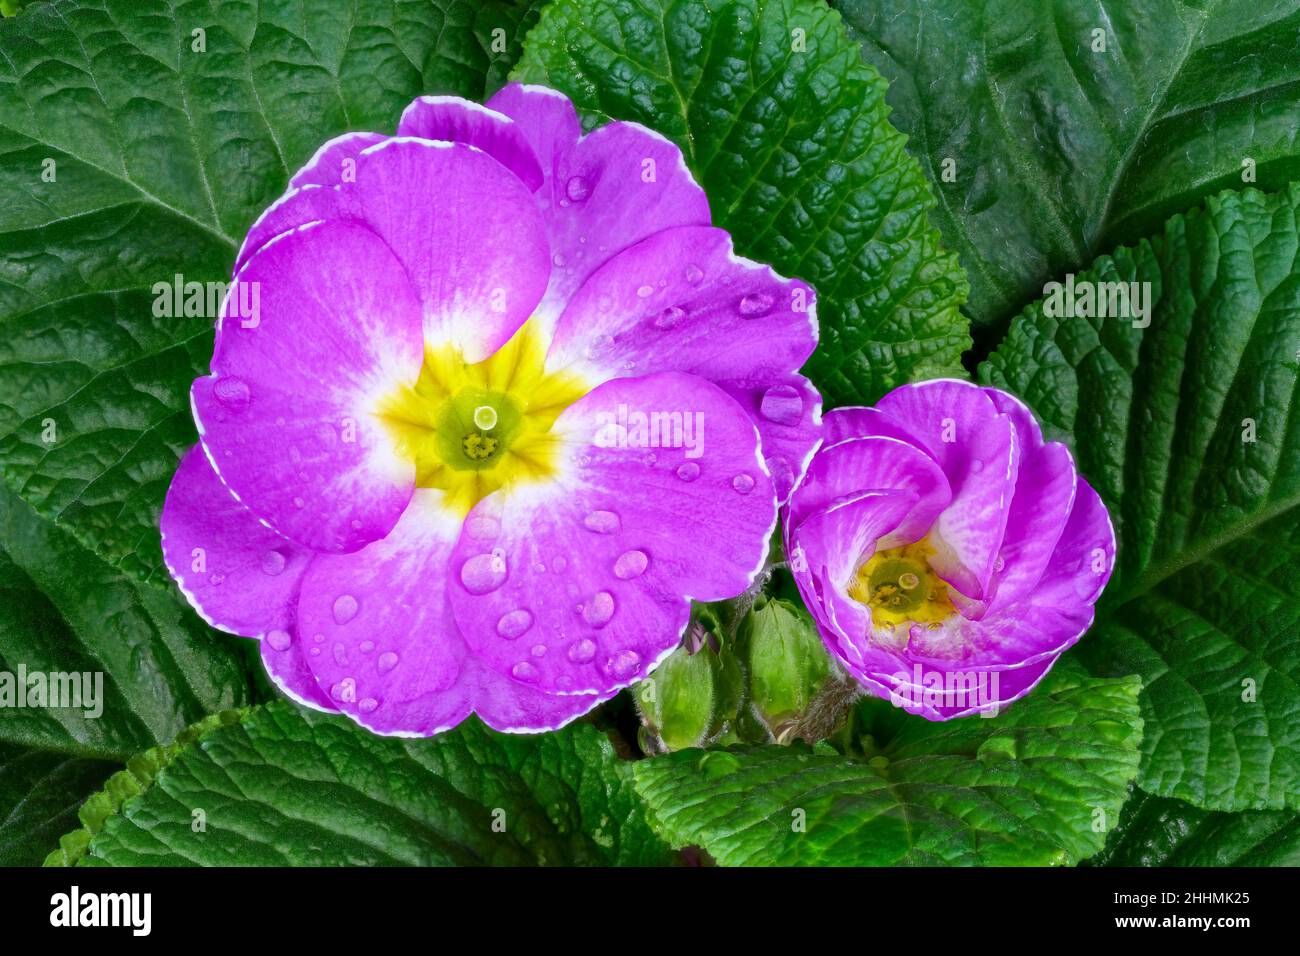 Gorgeous Pink Primula, (Primula vulgaris), also known as Primrose, flowers nestled amongst dark green leaves and sprinkled with dewdrops Stock Photo